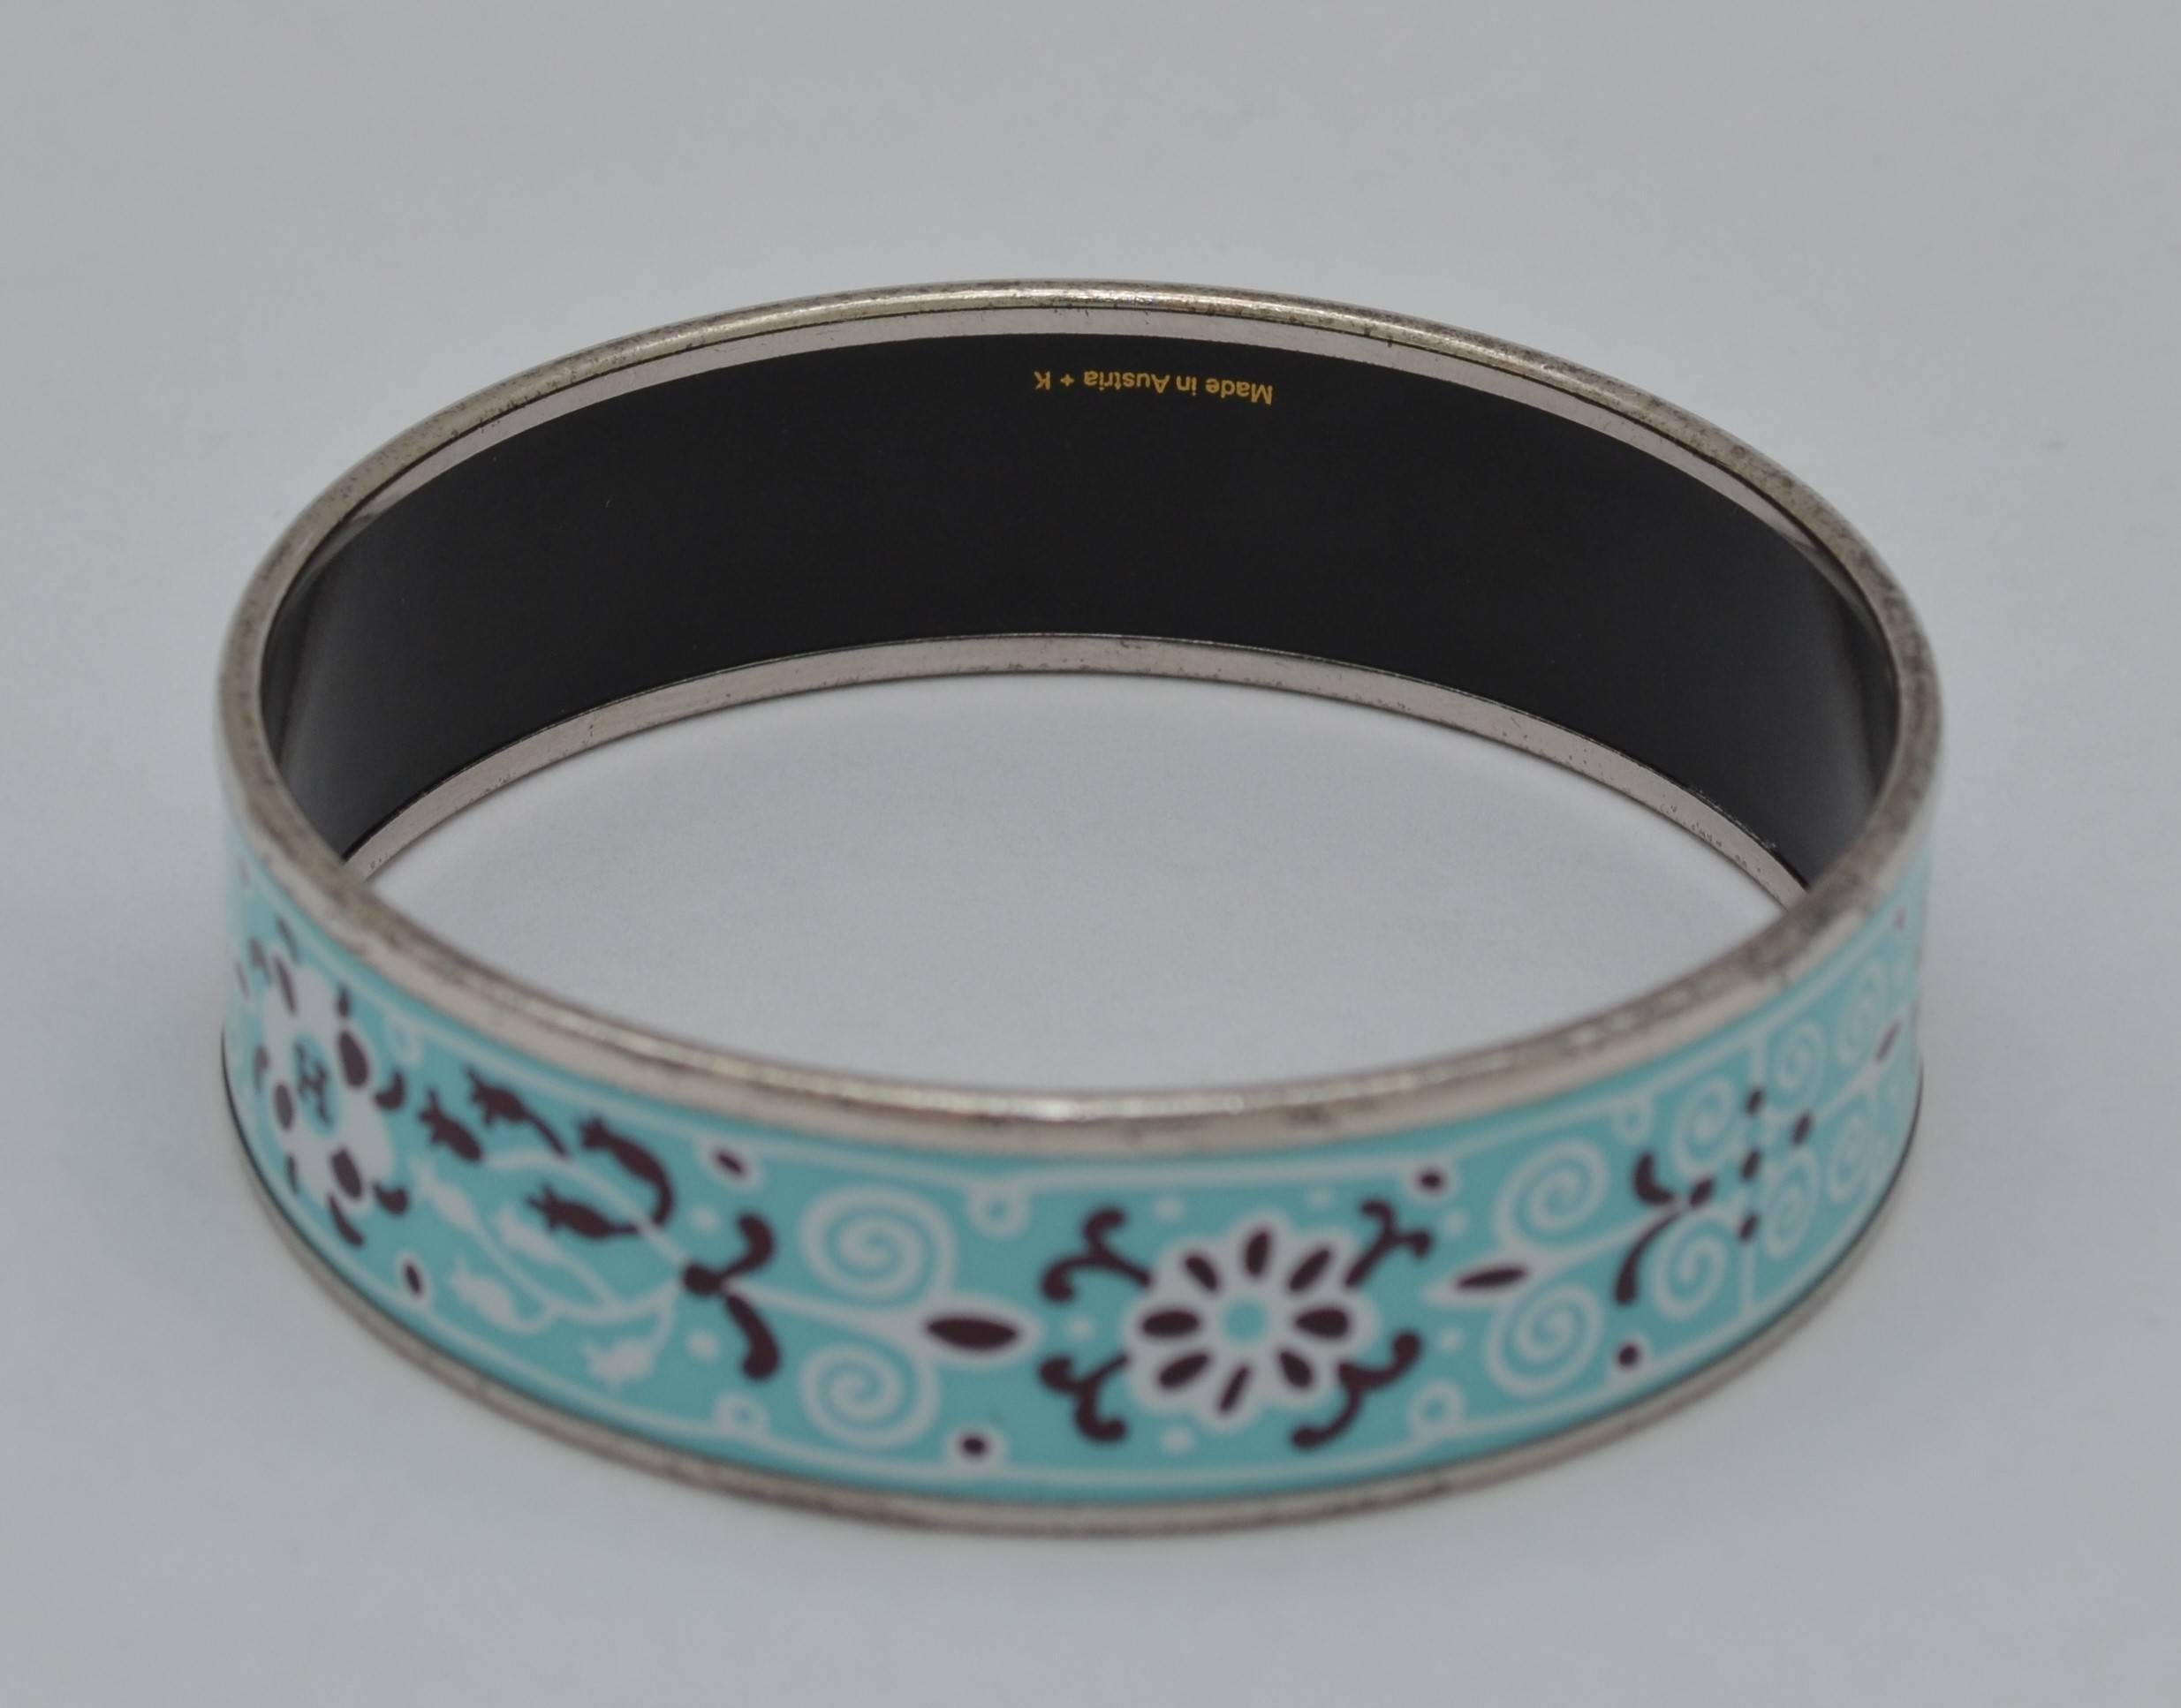 Hermes Paris Turquoise Enamel Print Bangle Bracelet size 70 Large

Hermes Paris silver-tone metal bangle features a turquoise background with a print on the enamel, and is made in Austria. Diameter measures 7 centimeters (2.75 inches), width is 2